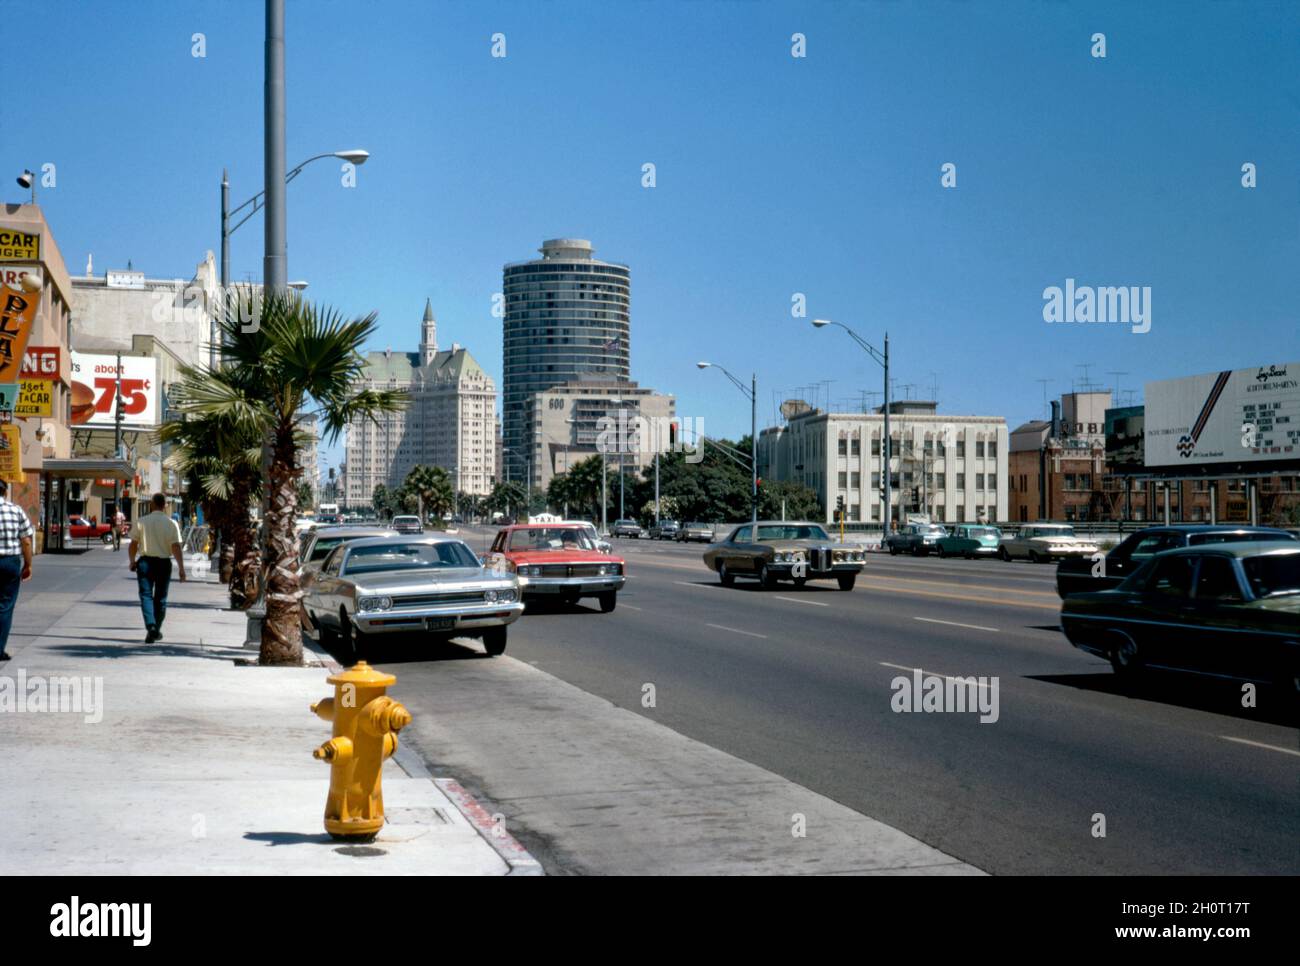 A view looking down a busy East Ocean Boulevard, Long Beach, California, USA in 1972. The city is located within the Los Angeles metropolitan area. This is one of the main streets downtown. The round building is International Tower. Built in 1966 as a 32-story round apartment complex. In the distance is Villa Riviera, built in 1929. The elegant, 16-story Château-style building is currently used as condominiums. This image is from an old American amateur Kodak colour transparency – a vintage 1970s photograph. Stock Photo